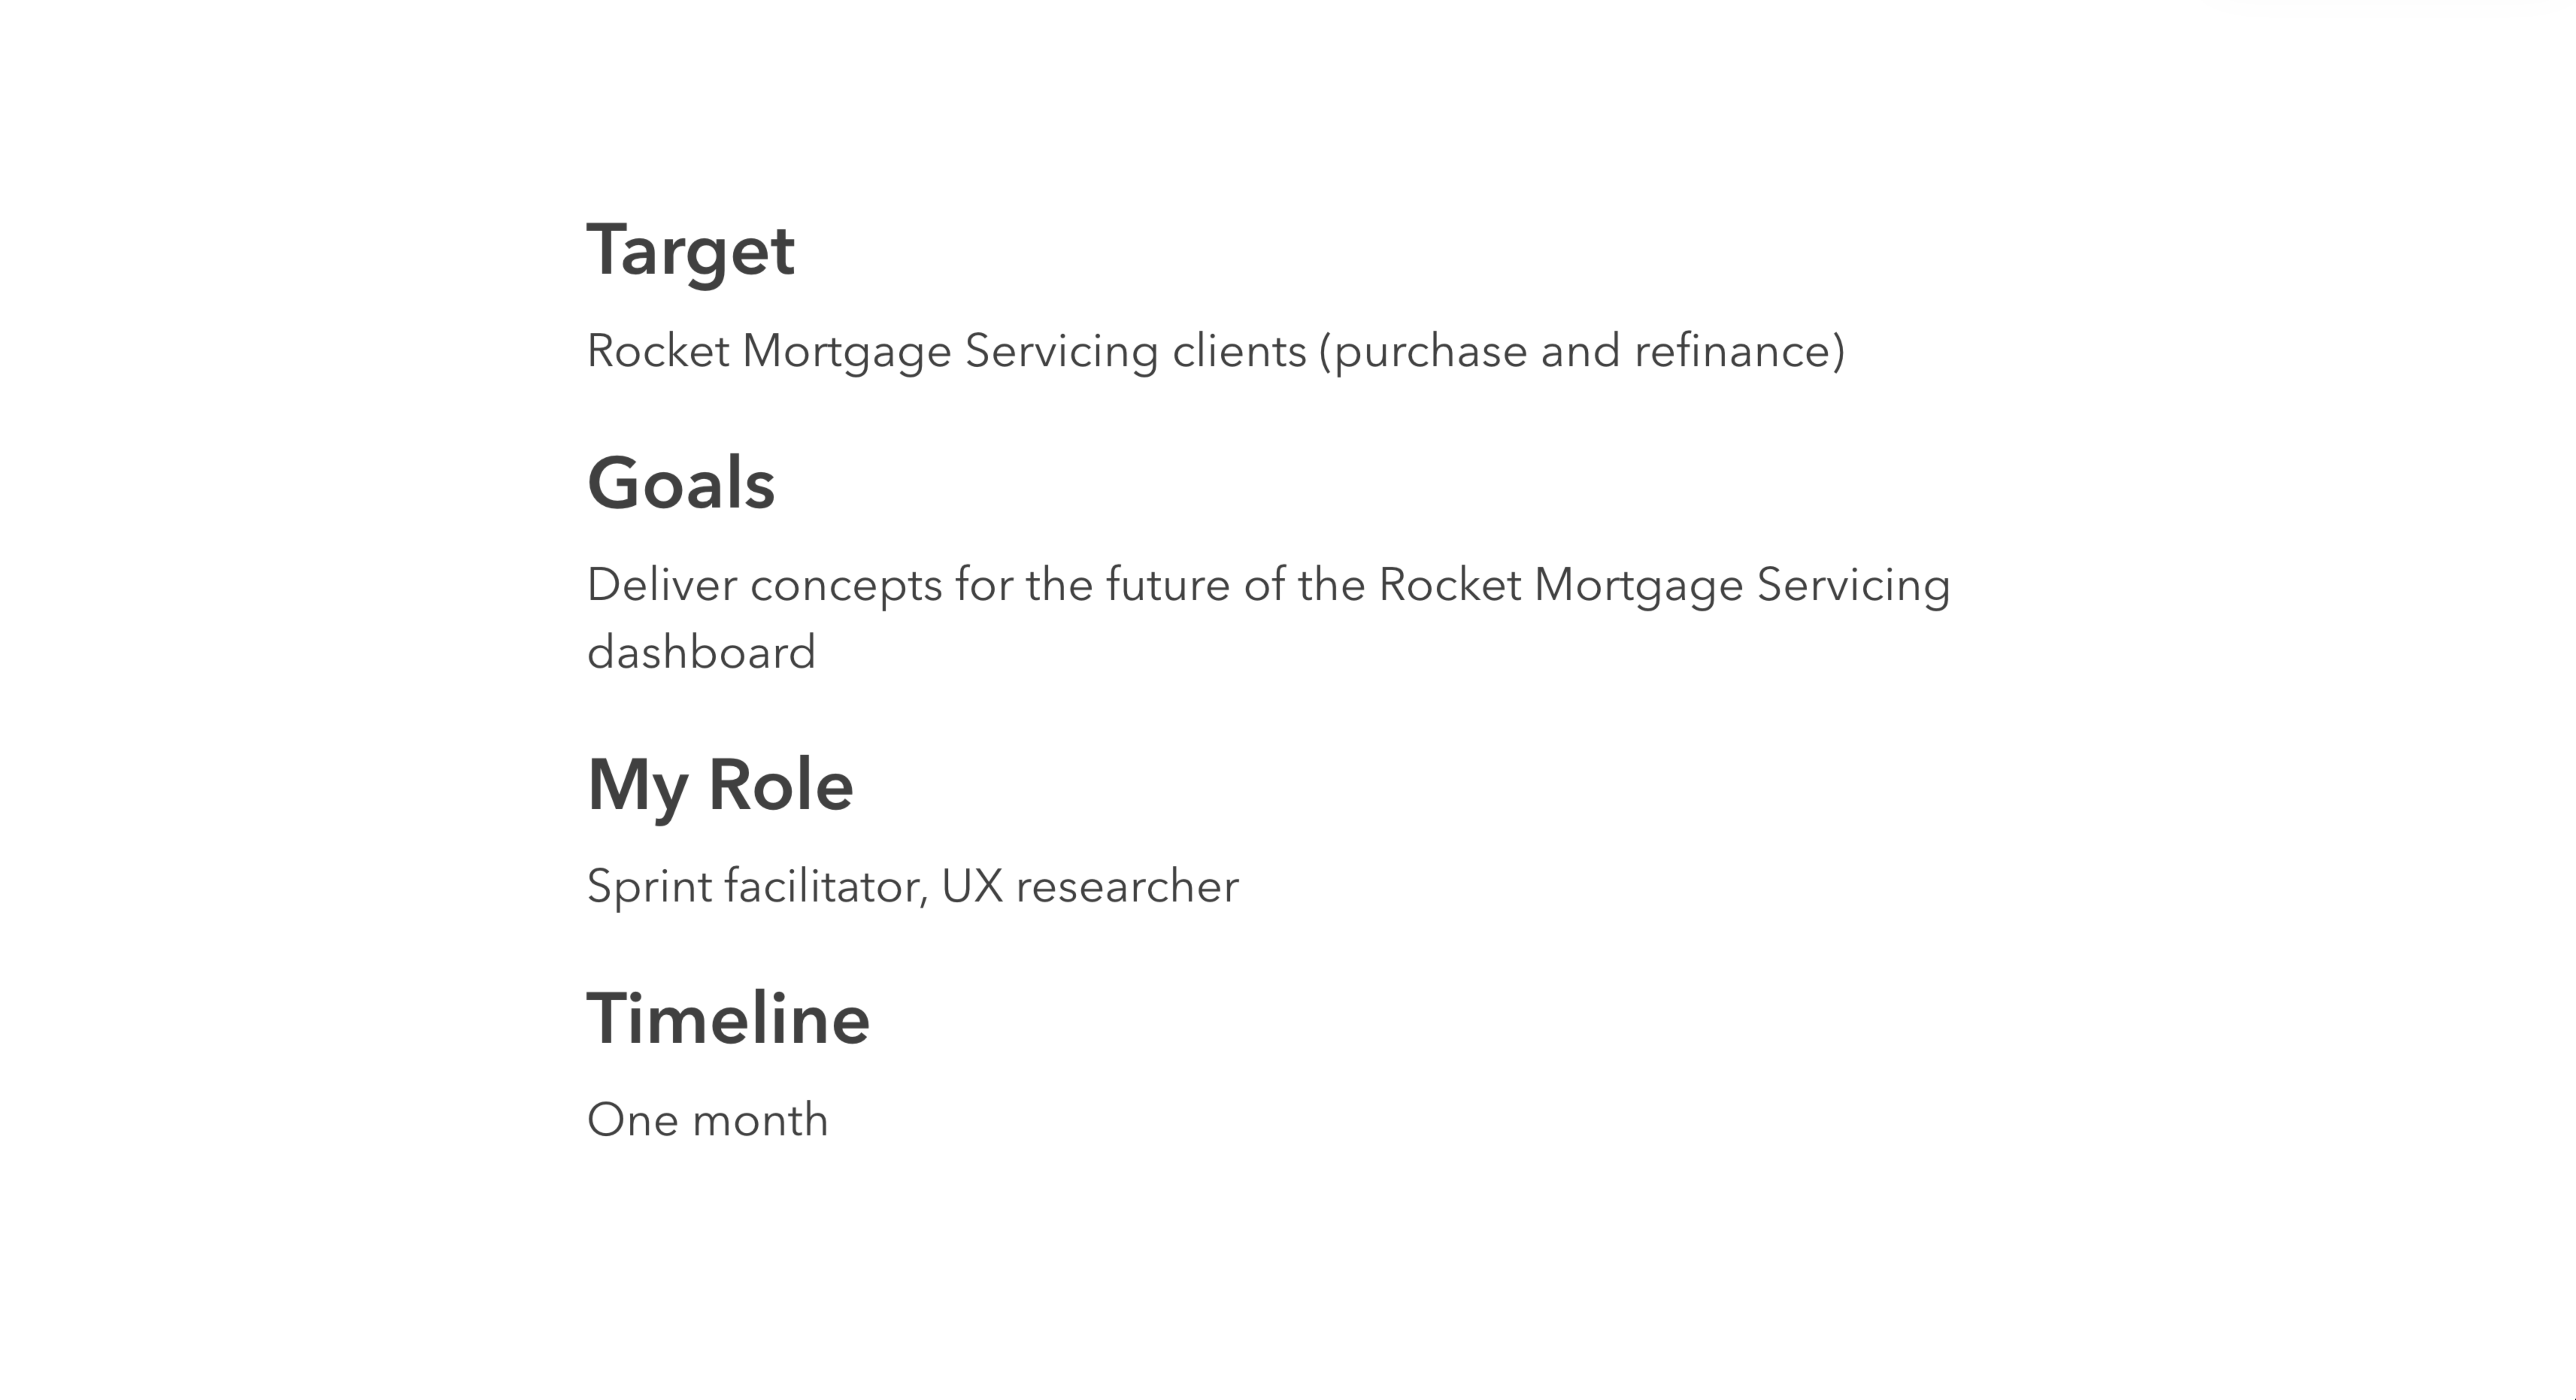 target, goals, my role, and timeline for the rocket mortgage personas ux project